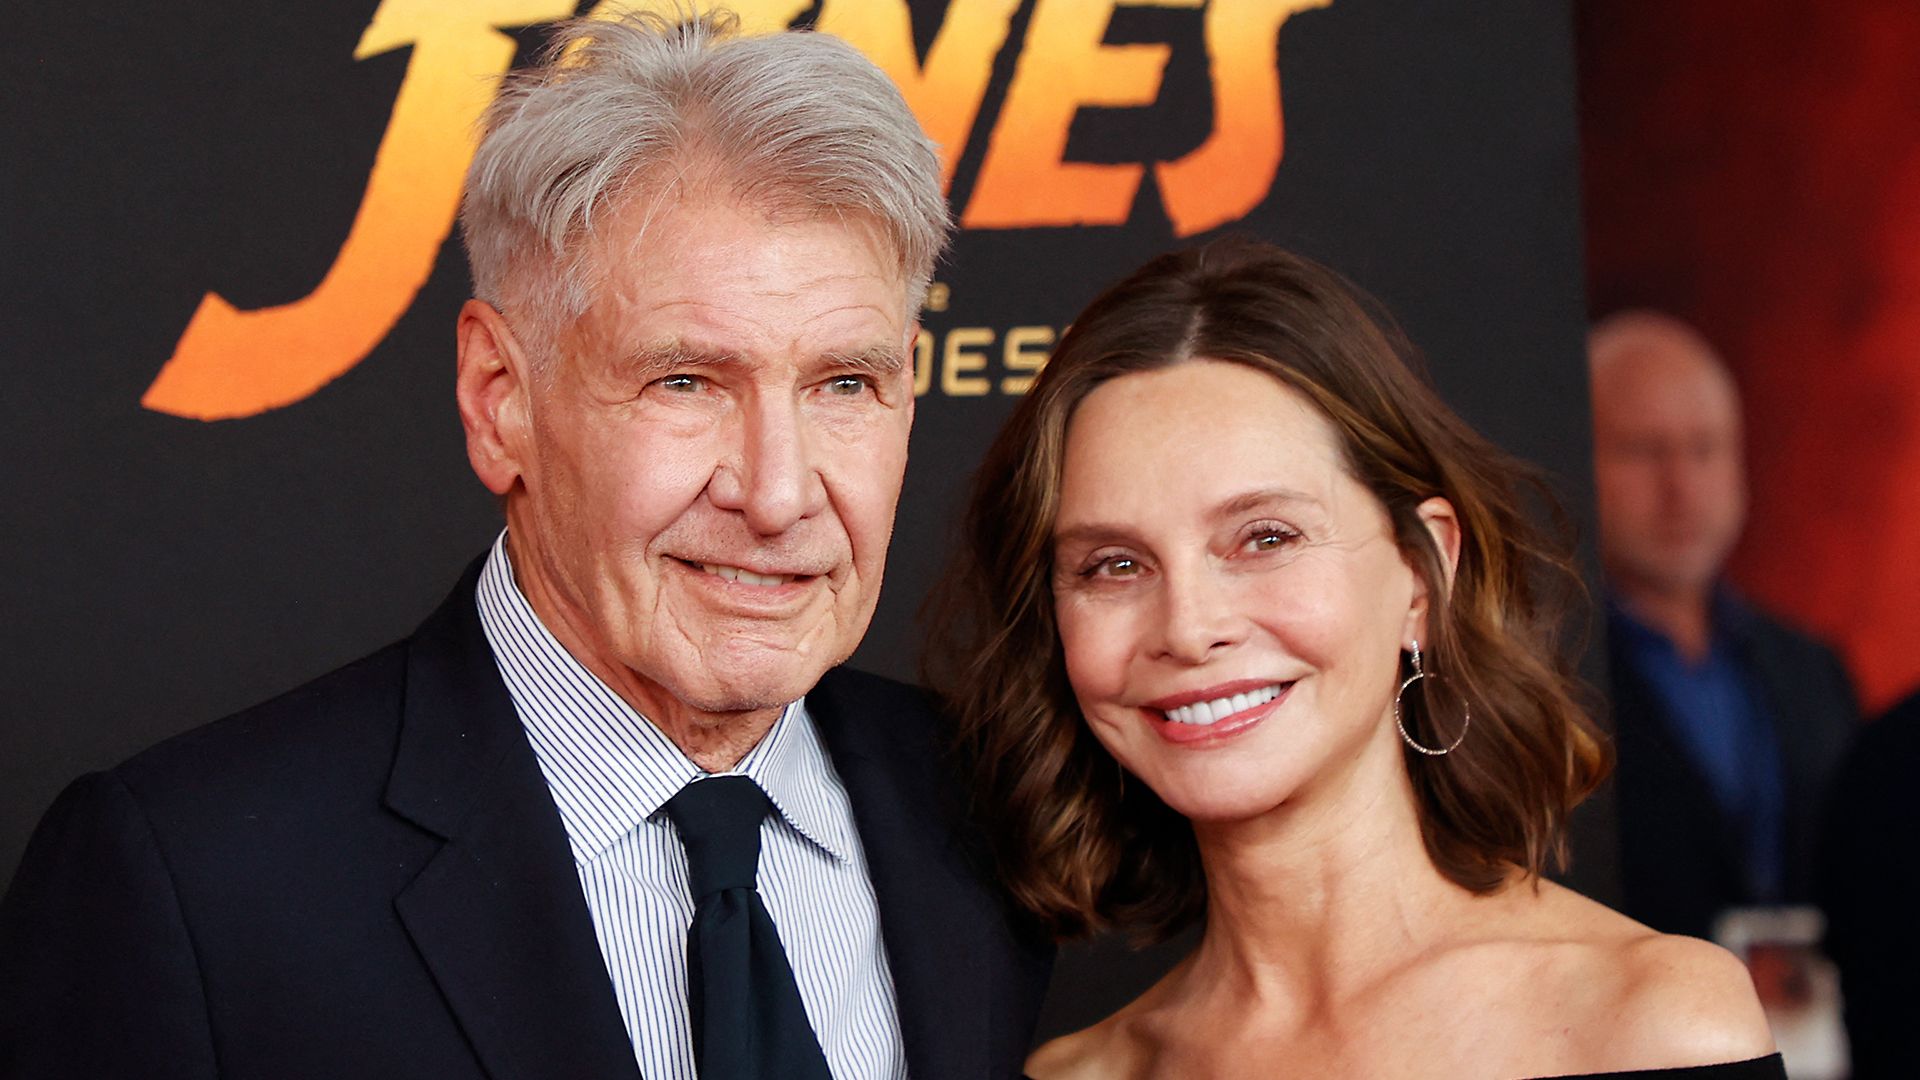 Harrison Ford and his wife Calista Flockhart at the premiere of Indiana Jones 5 in 2023. 